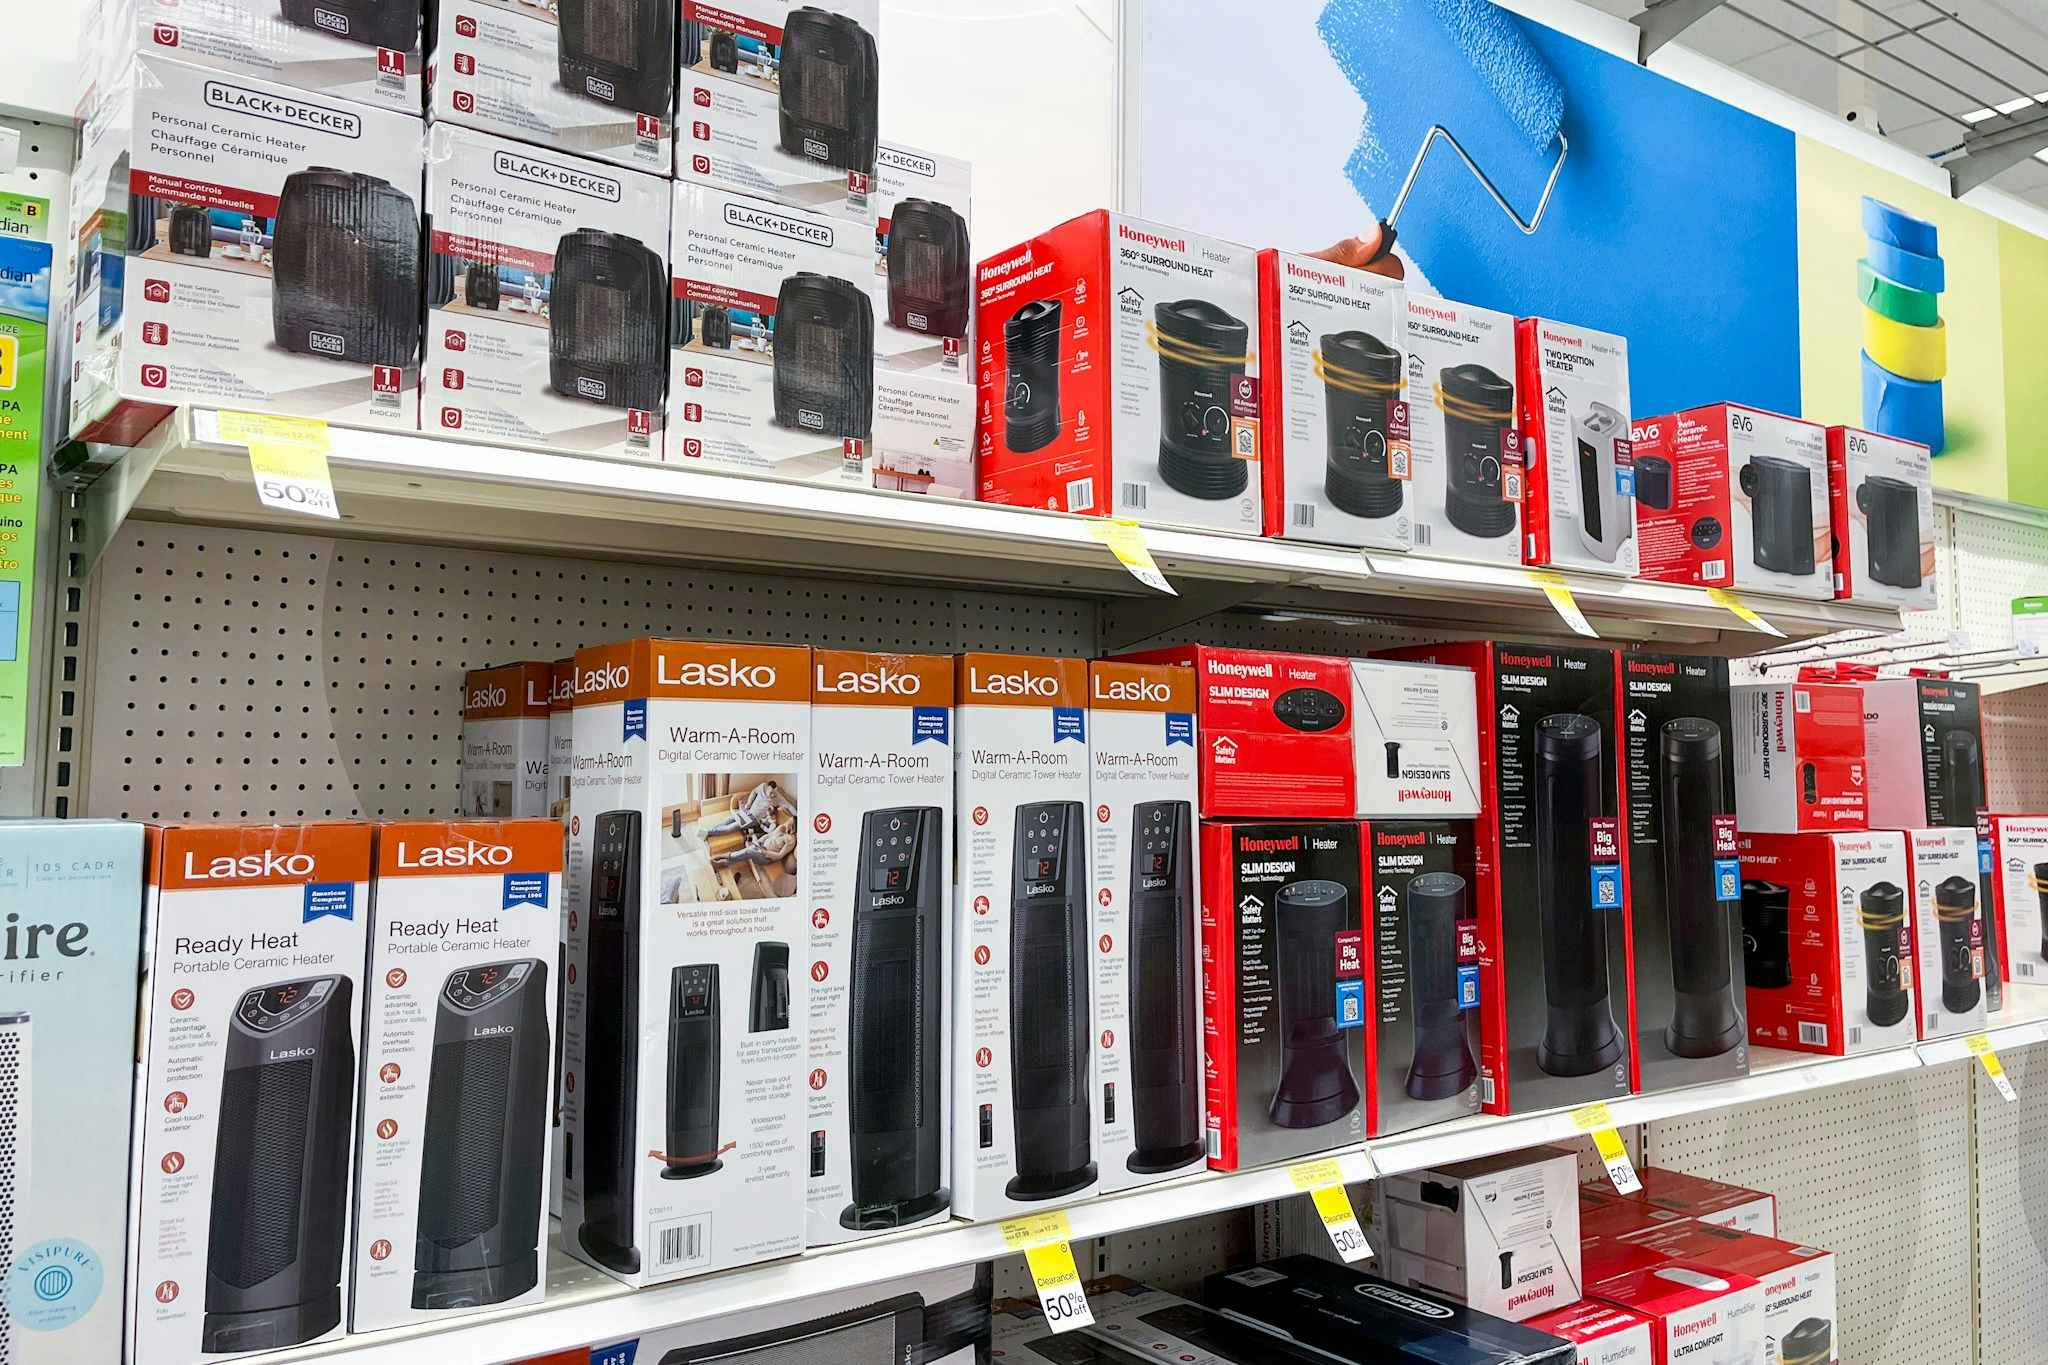 Clearance Space Heaters Are 70% Off — Pay as Low as $7.12 at Target